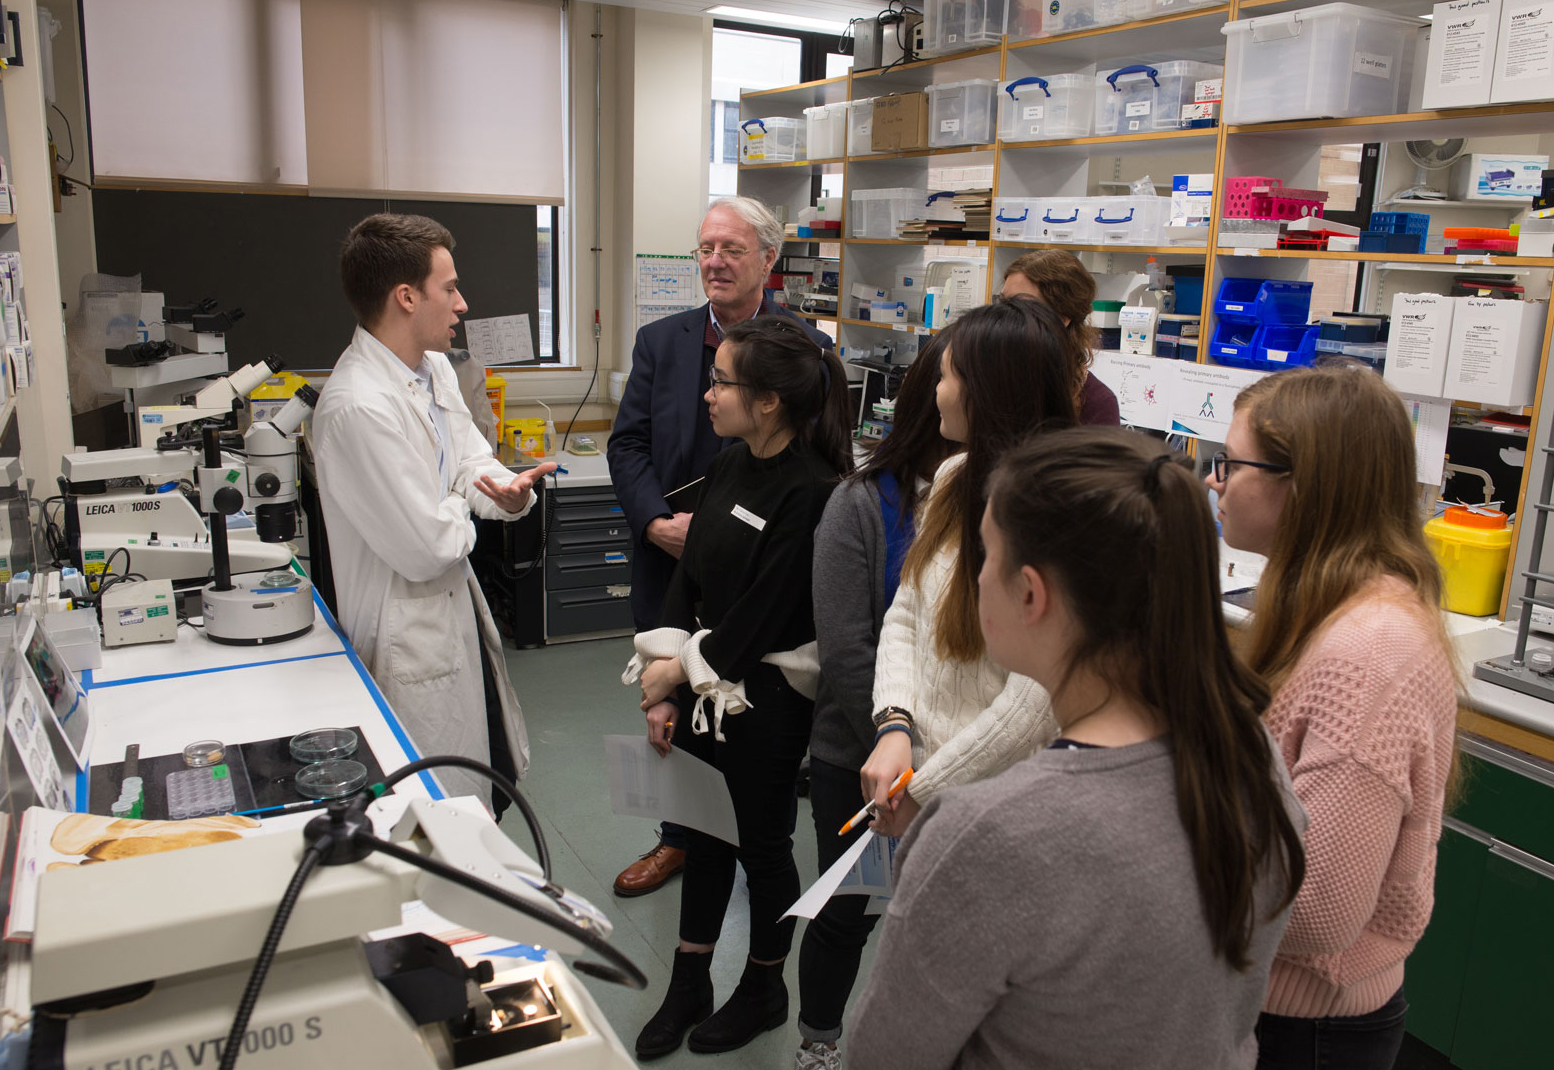 Pupils visited real working labs, where they could see for themselves some of the techniques and equipment used in the Unit’s research on the brain. Here, student Michael Orrell (left) demonstrates some of technologies he uses to study brain structure.